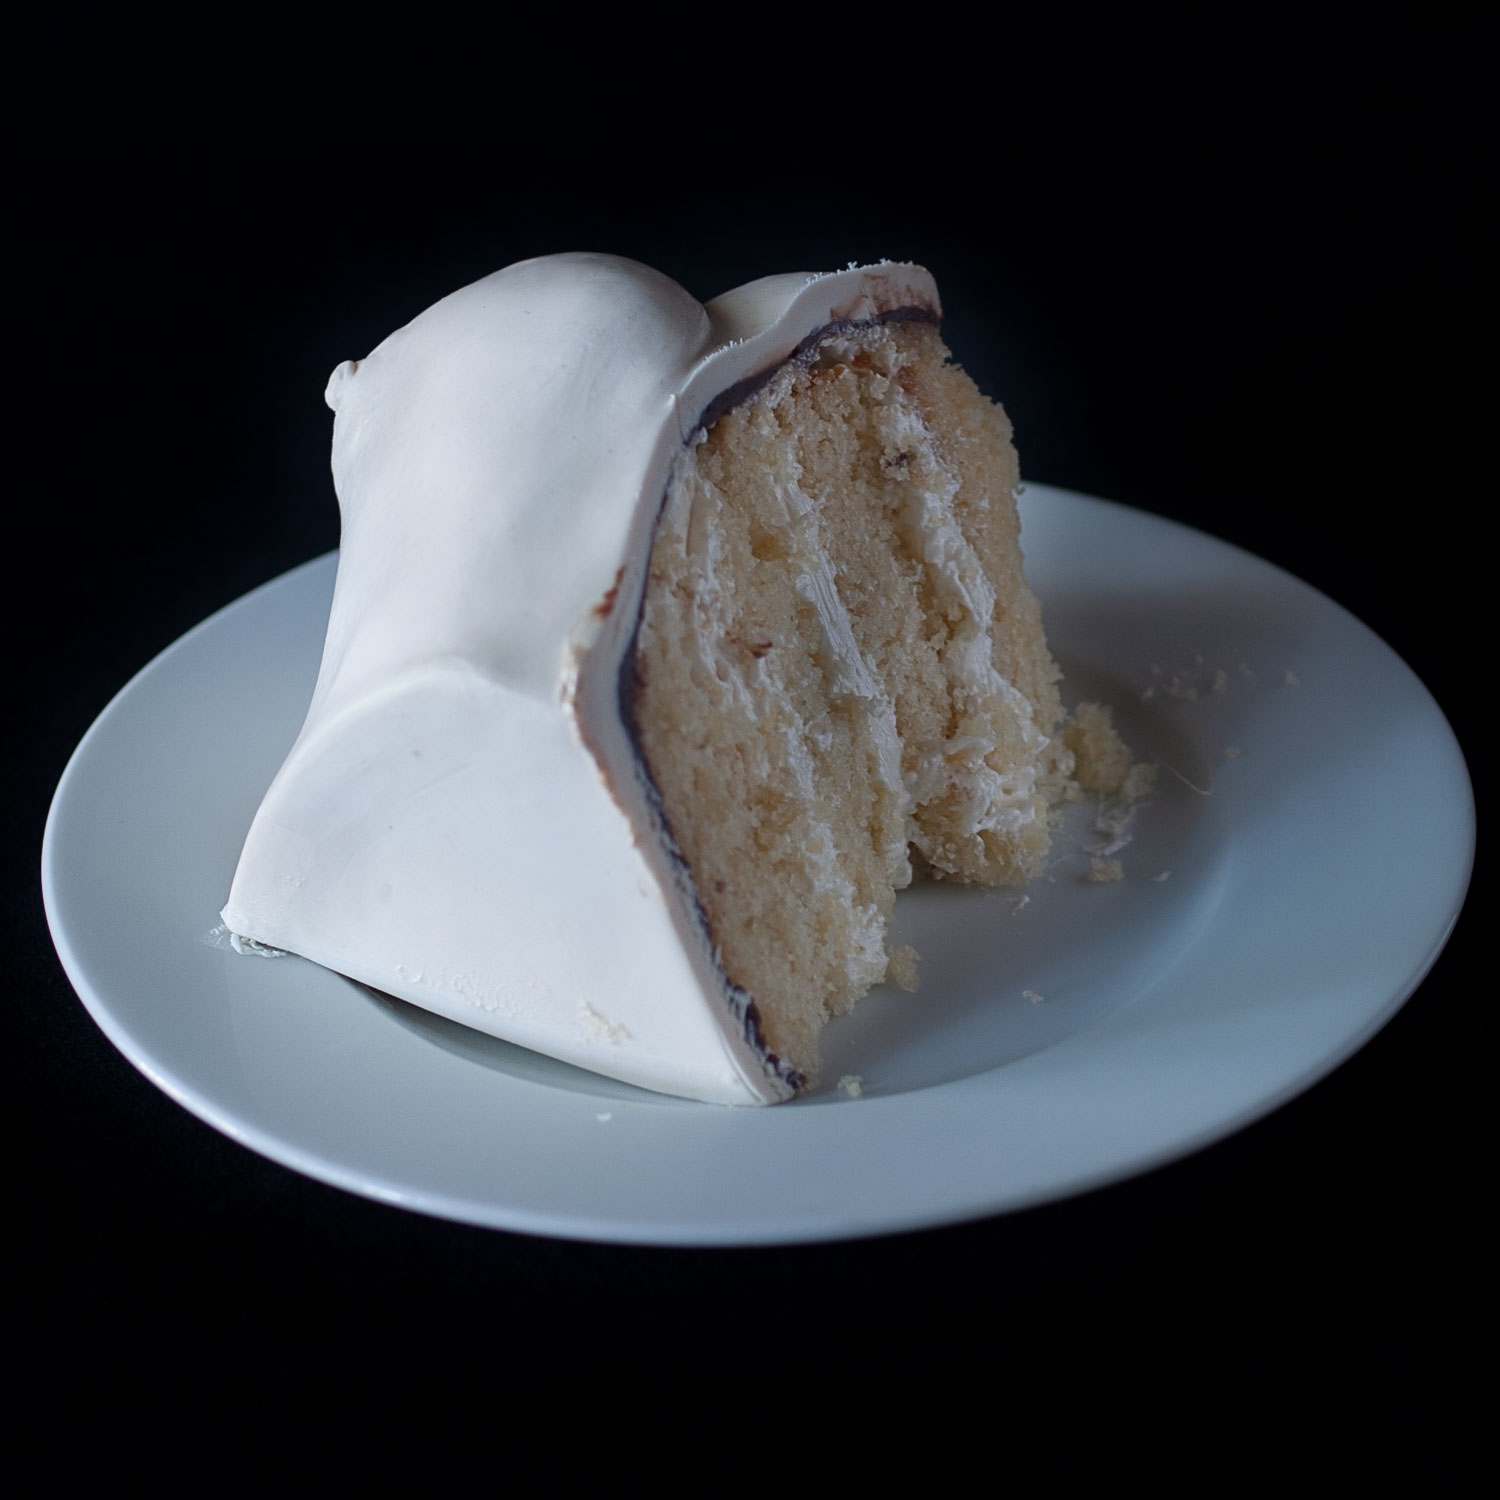 Slice of cake on small white plate. The cake is hand sculpted cake with a breast made of modeling chocolate.